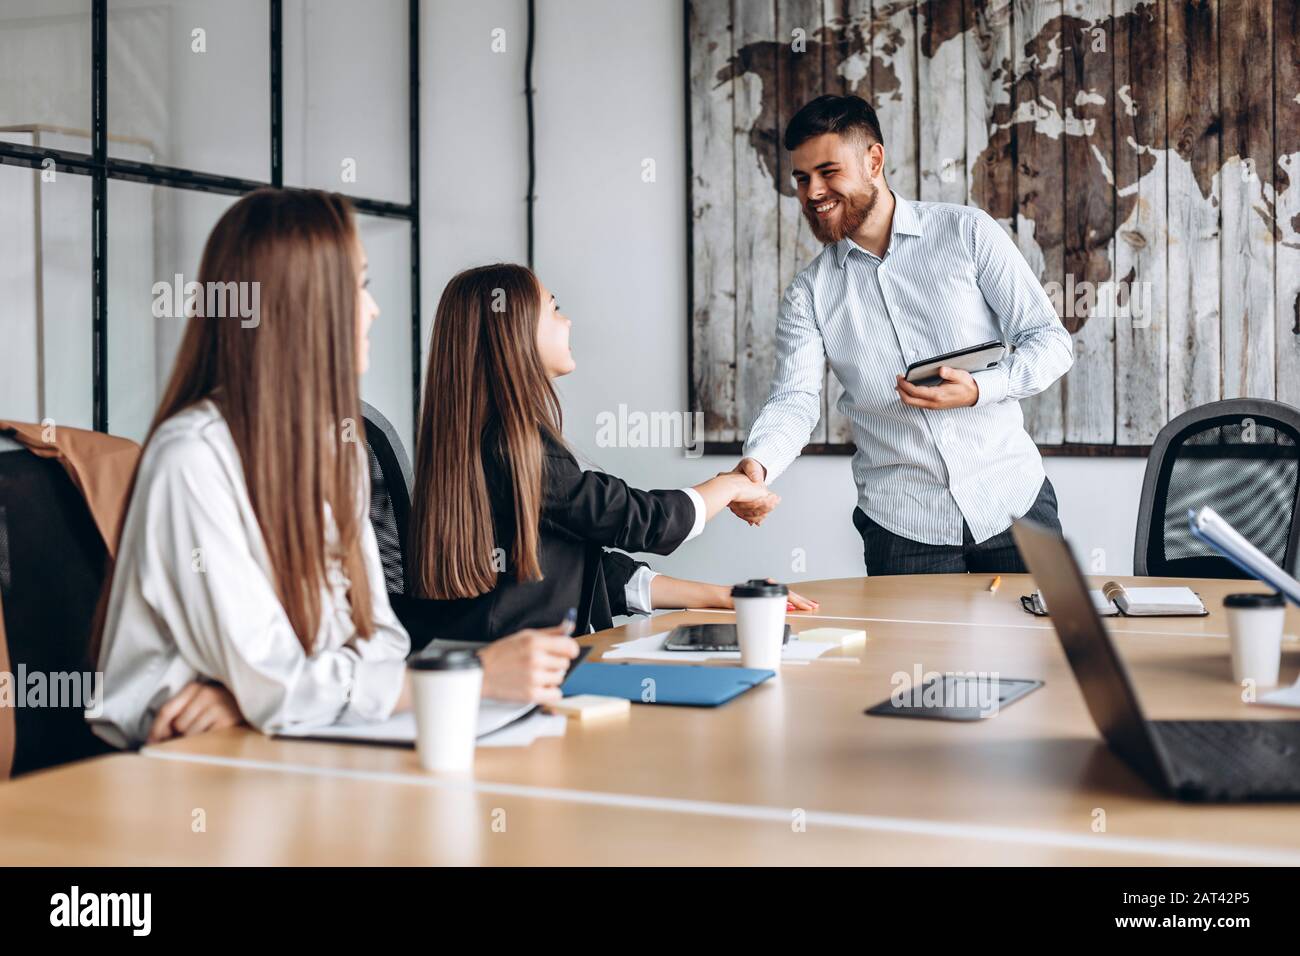 Attractive guy with a beard shakes hands with the girl he works with in the office Stock Photo